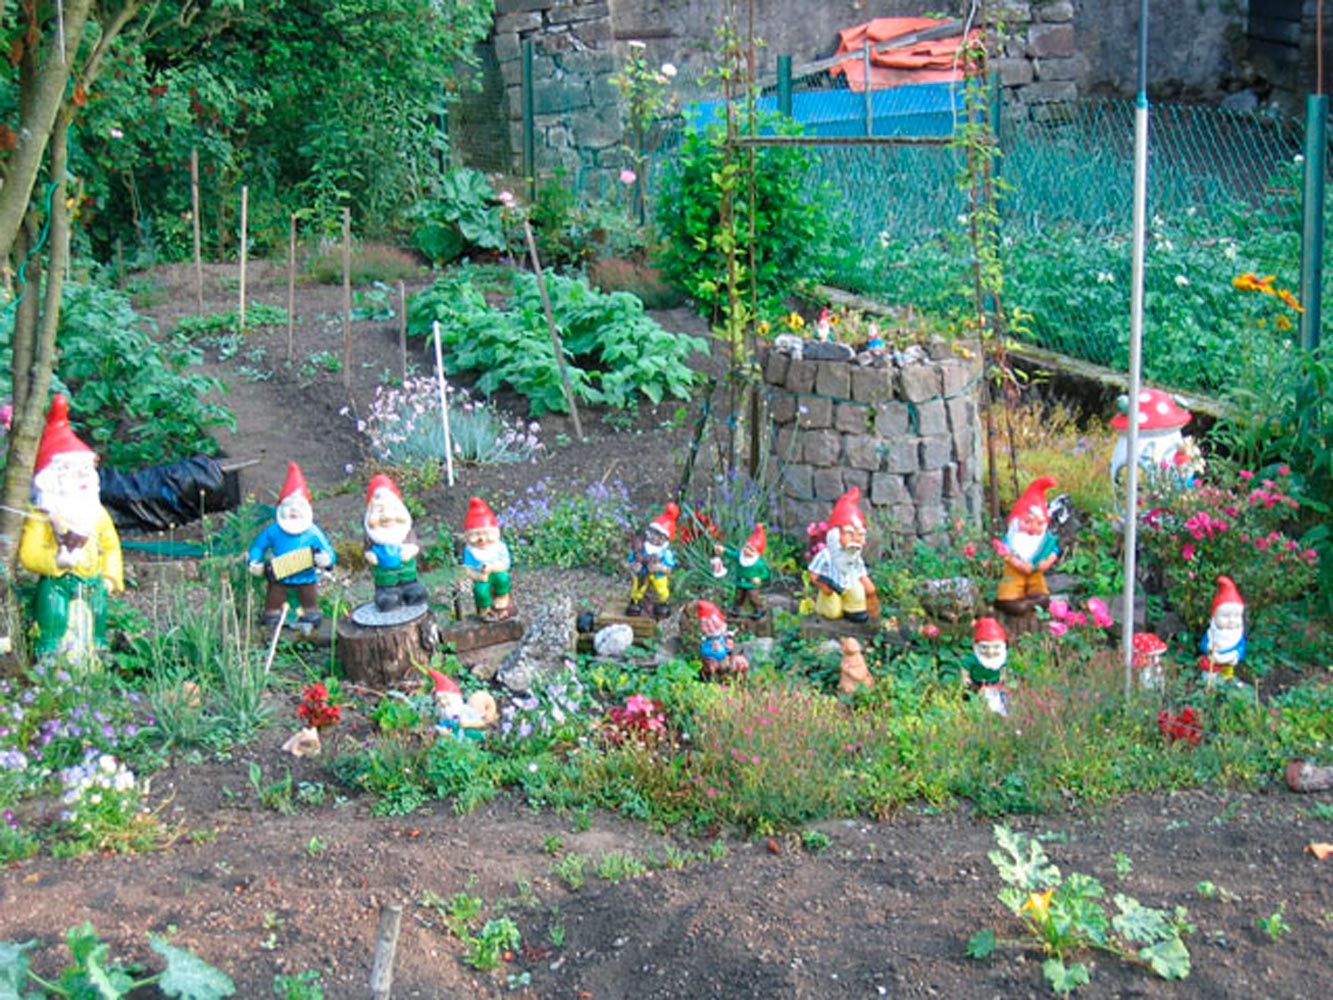 /include/Virtuals/AN2-SM2021/AN2images/AFR/A-village-full-of-magic--gnomes---2005.jpg